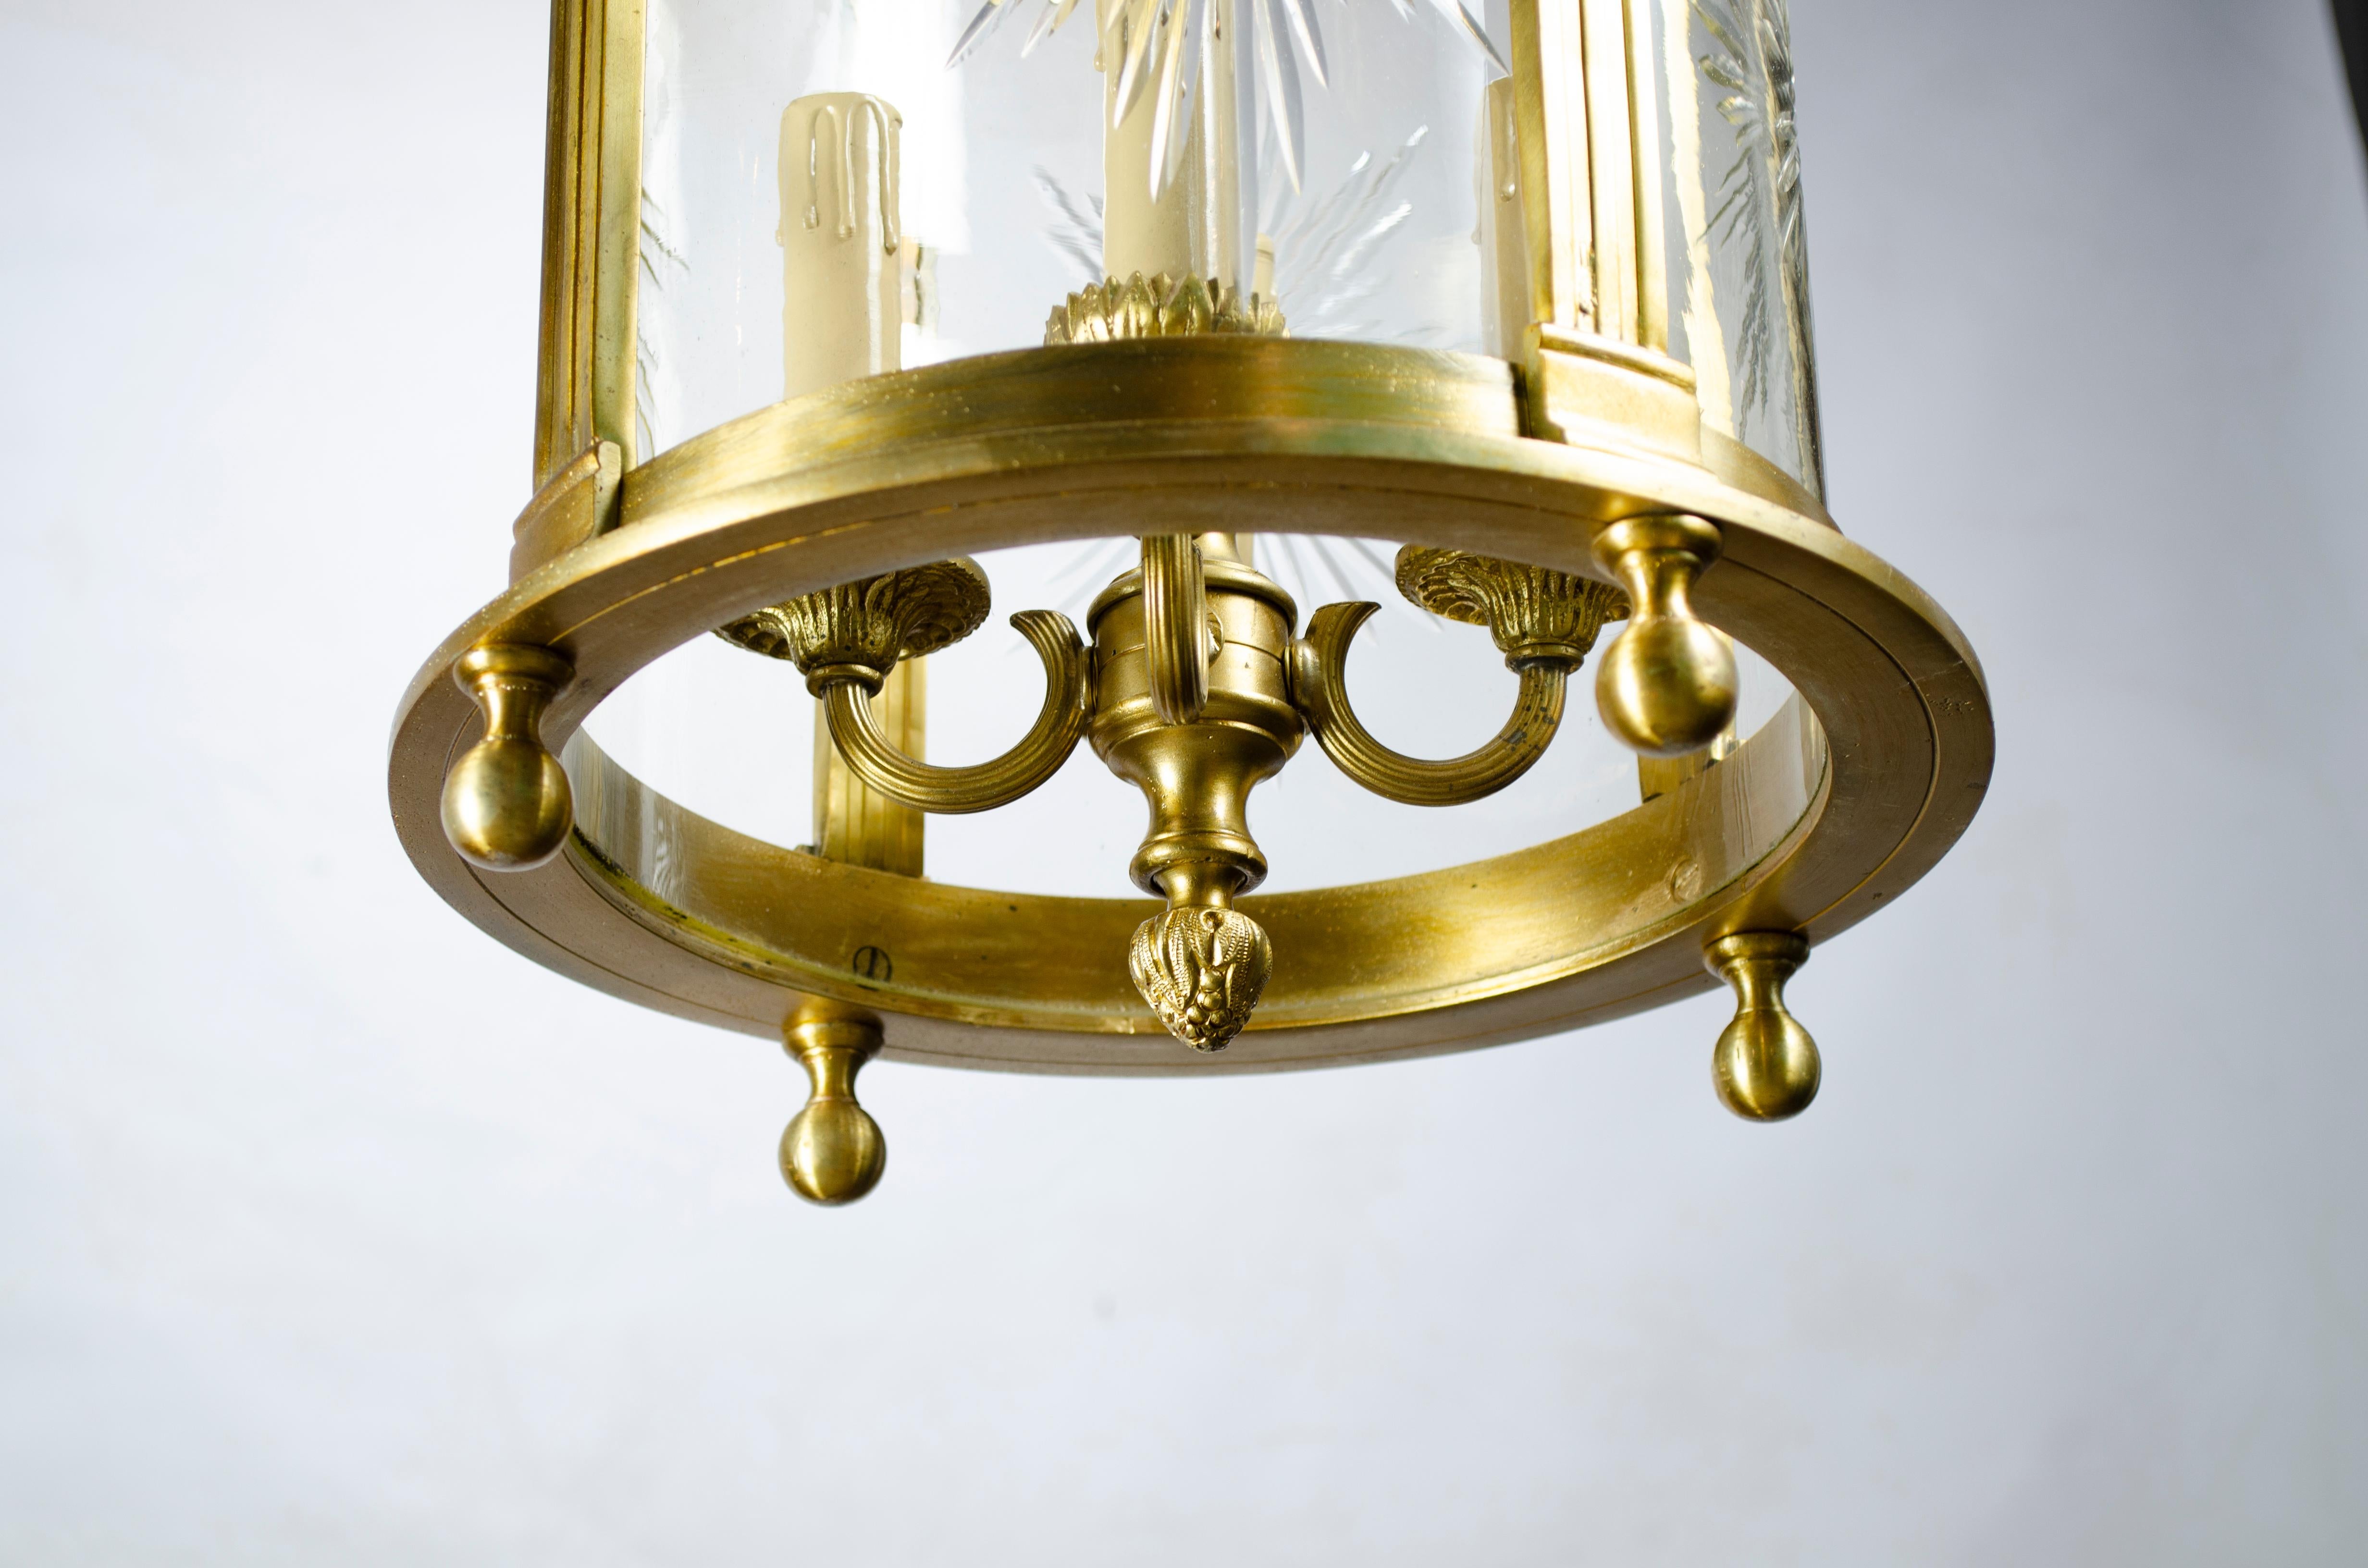 French pendant lamp
Lantern of the early 20th century
carved bombe glass
4 electric lights 220 w
golden patina.